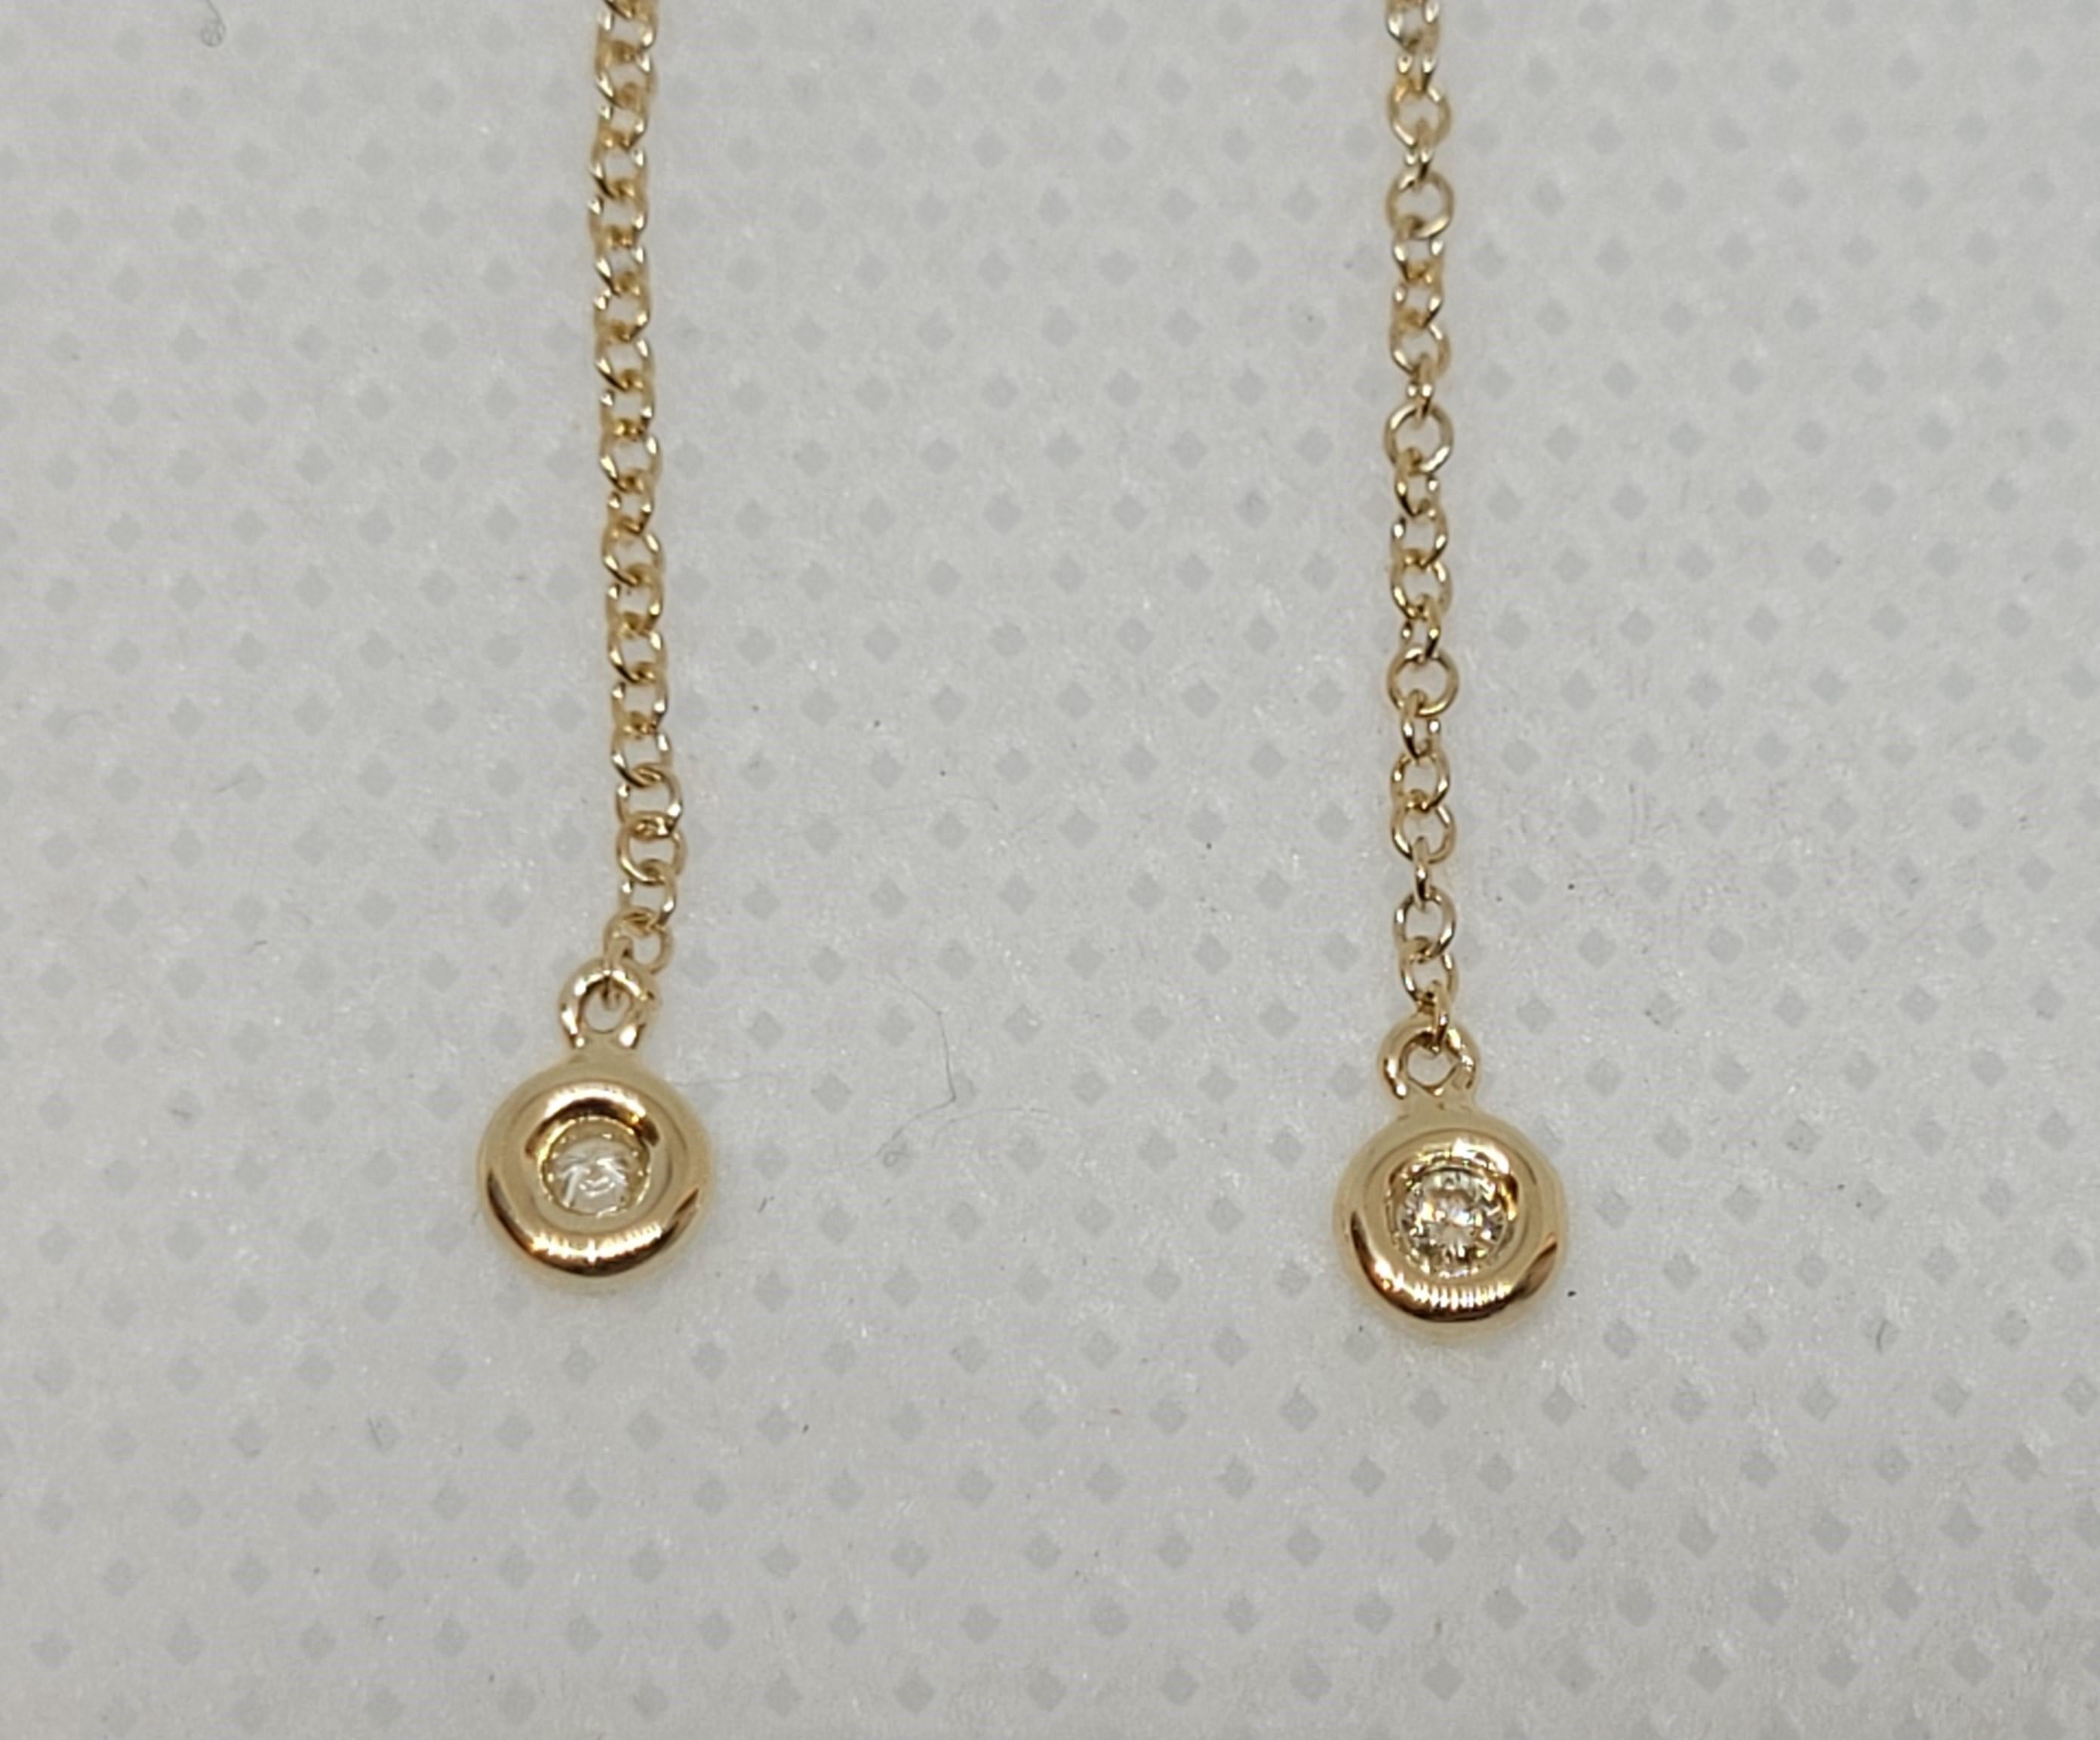 14kt yellow gold thread-style chain earrings with two bezel set round brilliant diamonds of approximately .04cttw. The diamonds are G/H color and SI clarity. The chain is a round link, stamped 14kt yellow gold, stamped with a designer symbol, and